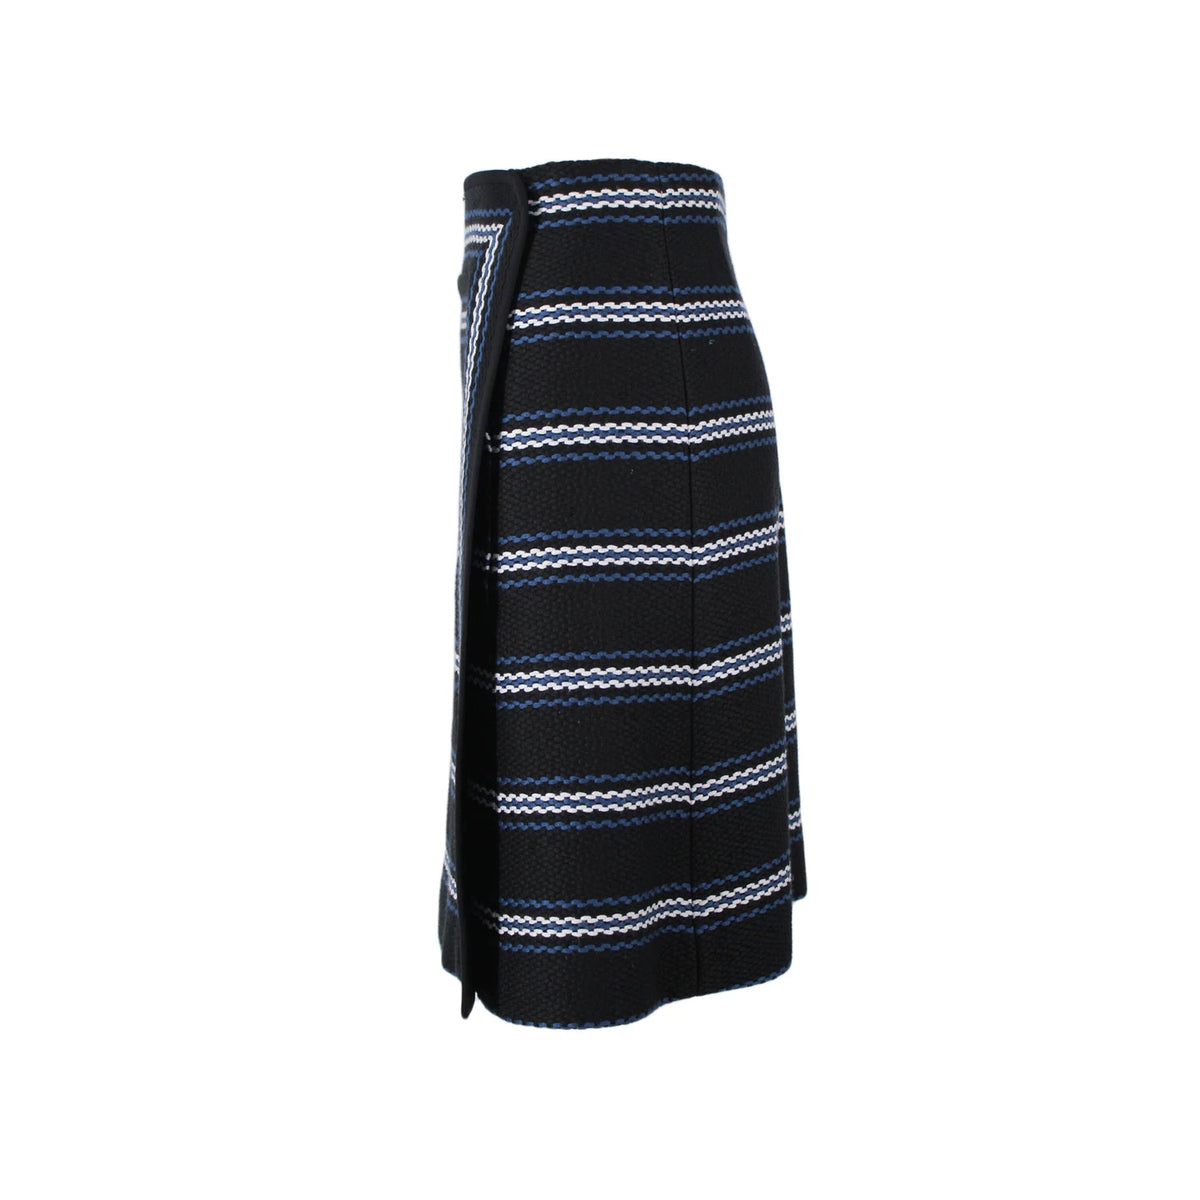 Pre-Owned CHLOE Black Woven Striped Skirt |  Size 38 FR - theREMODA